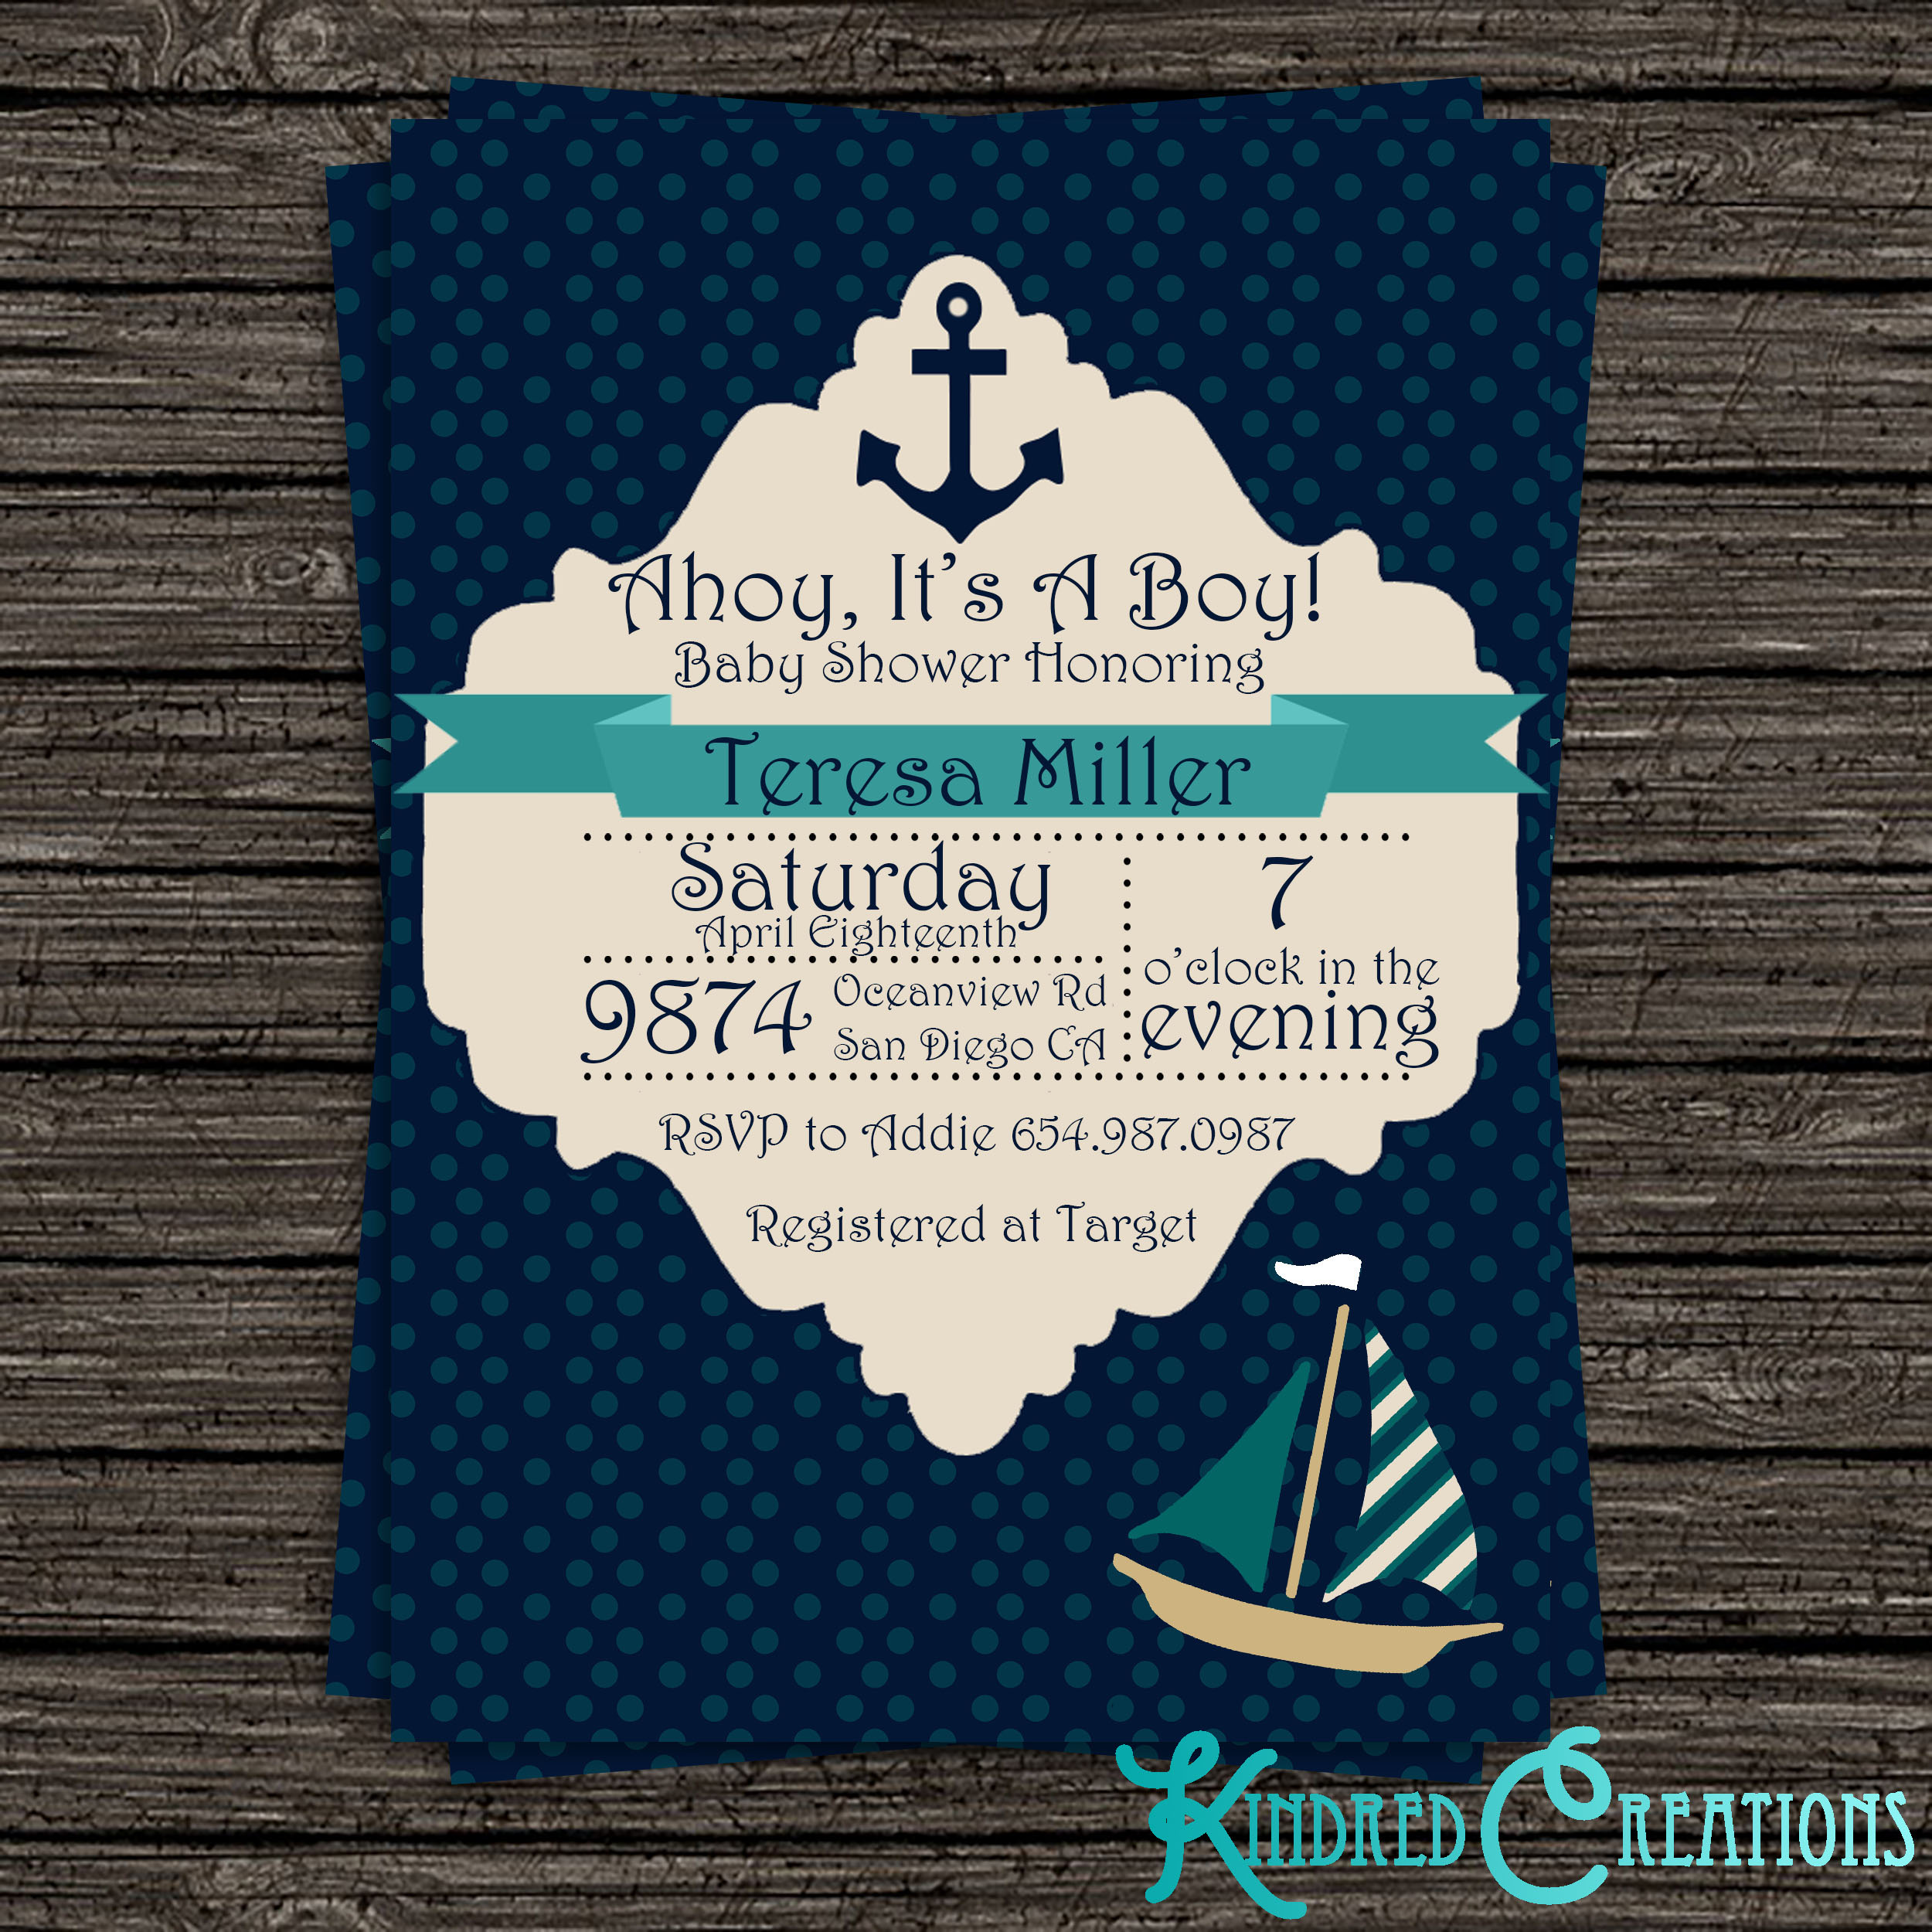 Full Size of Baby Shower:nautical Baby Shower Invitations For Boys Baby Girl Themes For Bedroom Baby Shower Ideas Baby Shower Decorations Themes For Baby Girl Nursery Elegant Baby Shower Oriental Trading Baby Shower Baby Shower Favors Ideas For Baby Shower Centerpieces